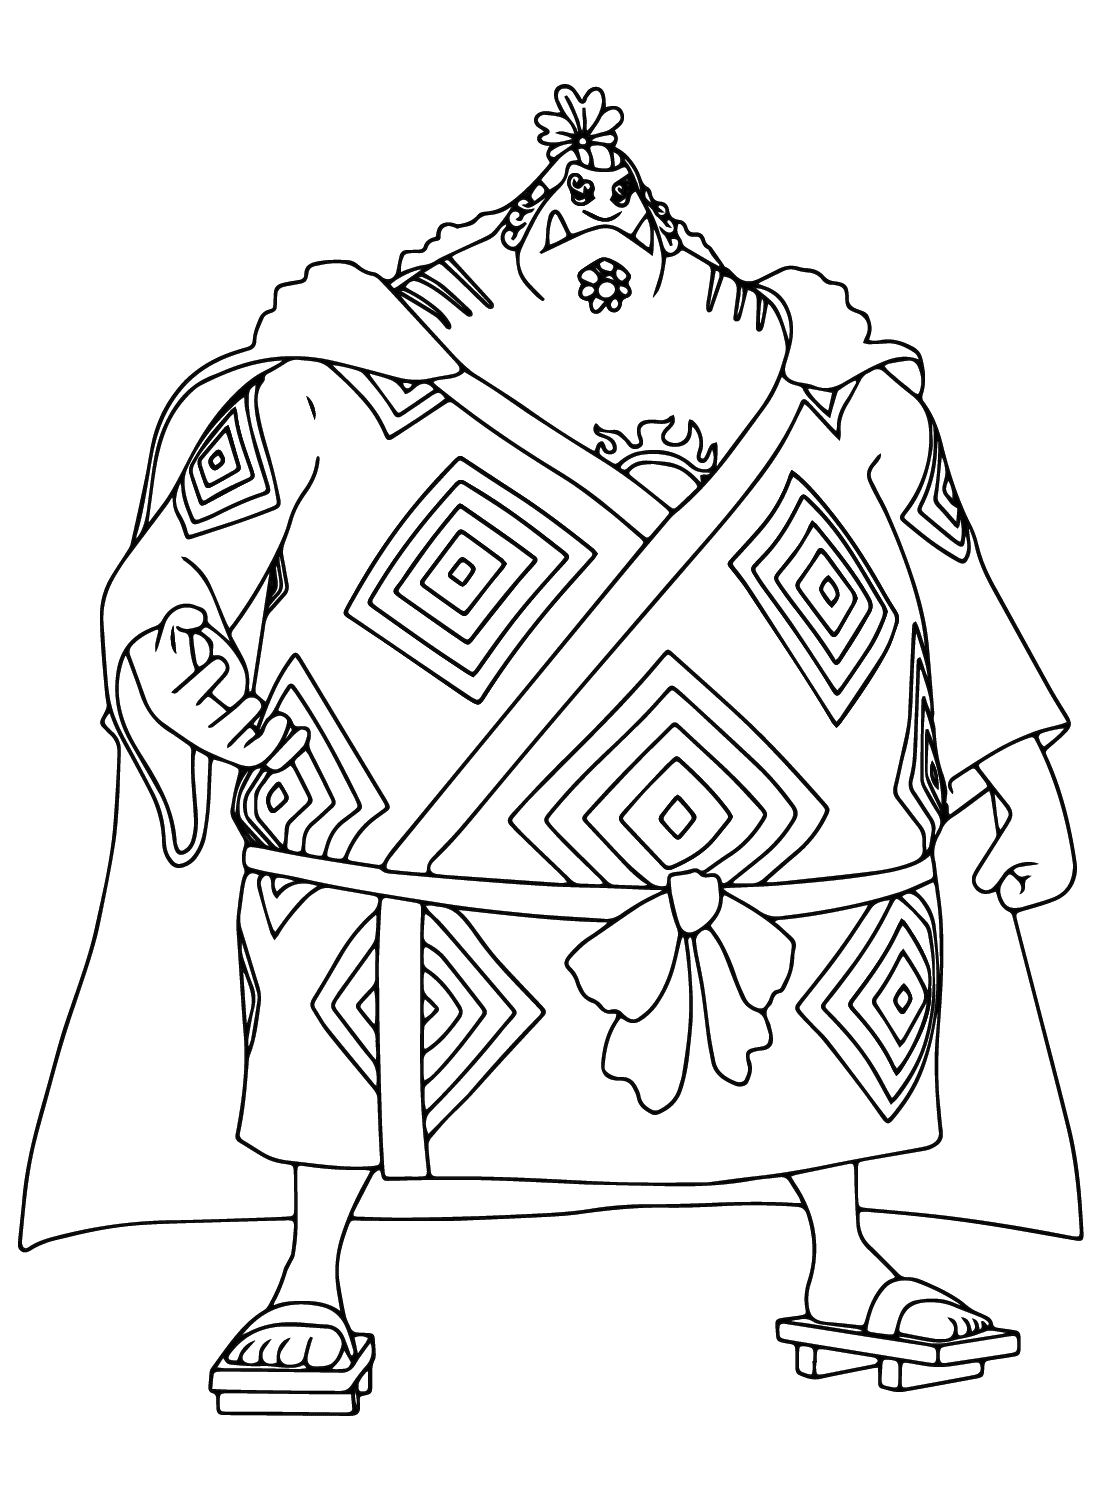 Jinbe Coloring Page to Print from Jinbe